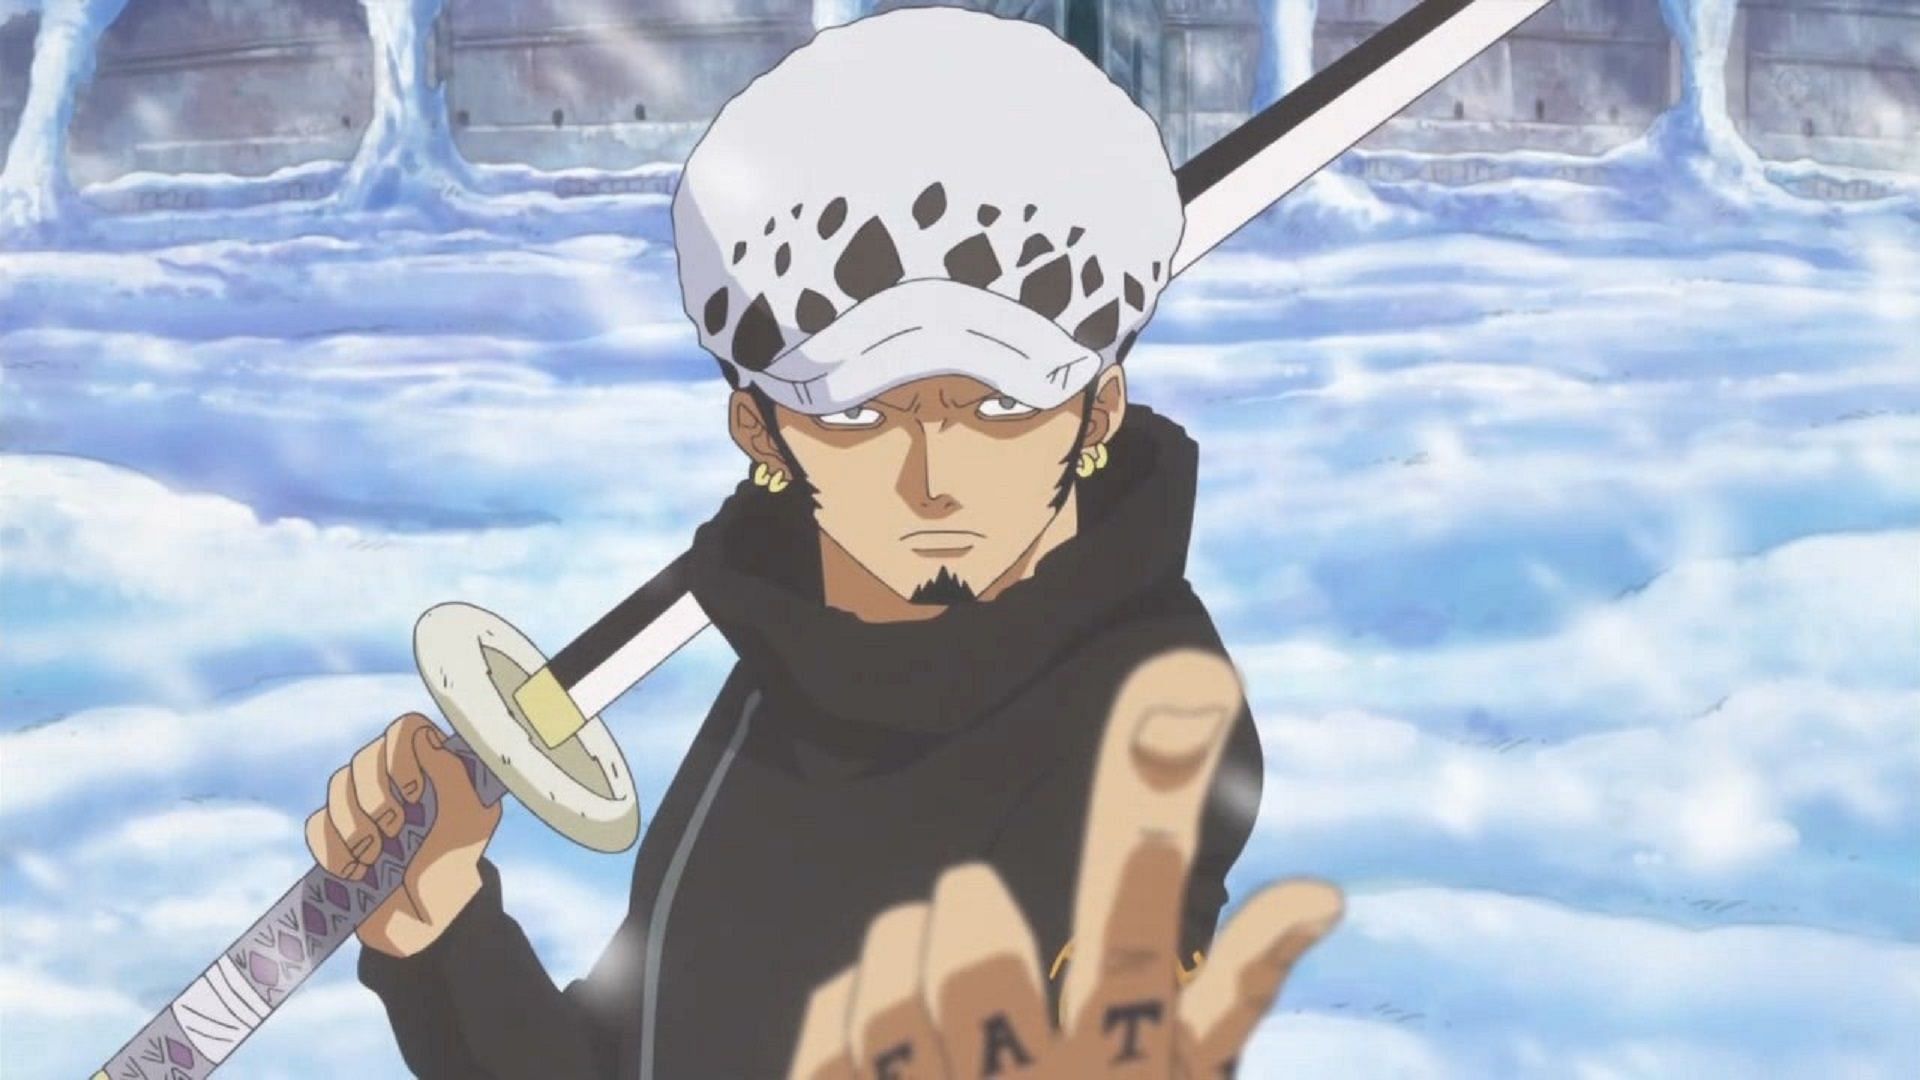 Takt is a technique that allow Law to use the surroundings to damage his opponent (Image via Toei Animation, One Piece)